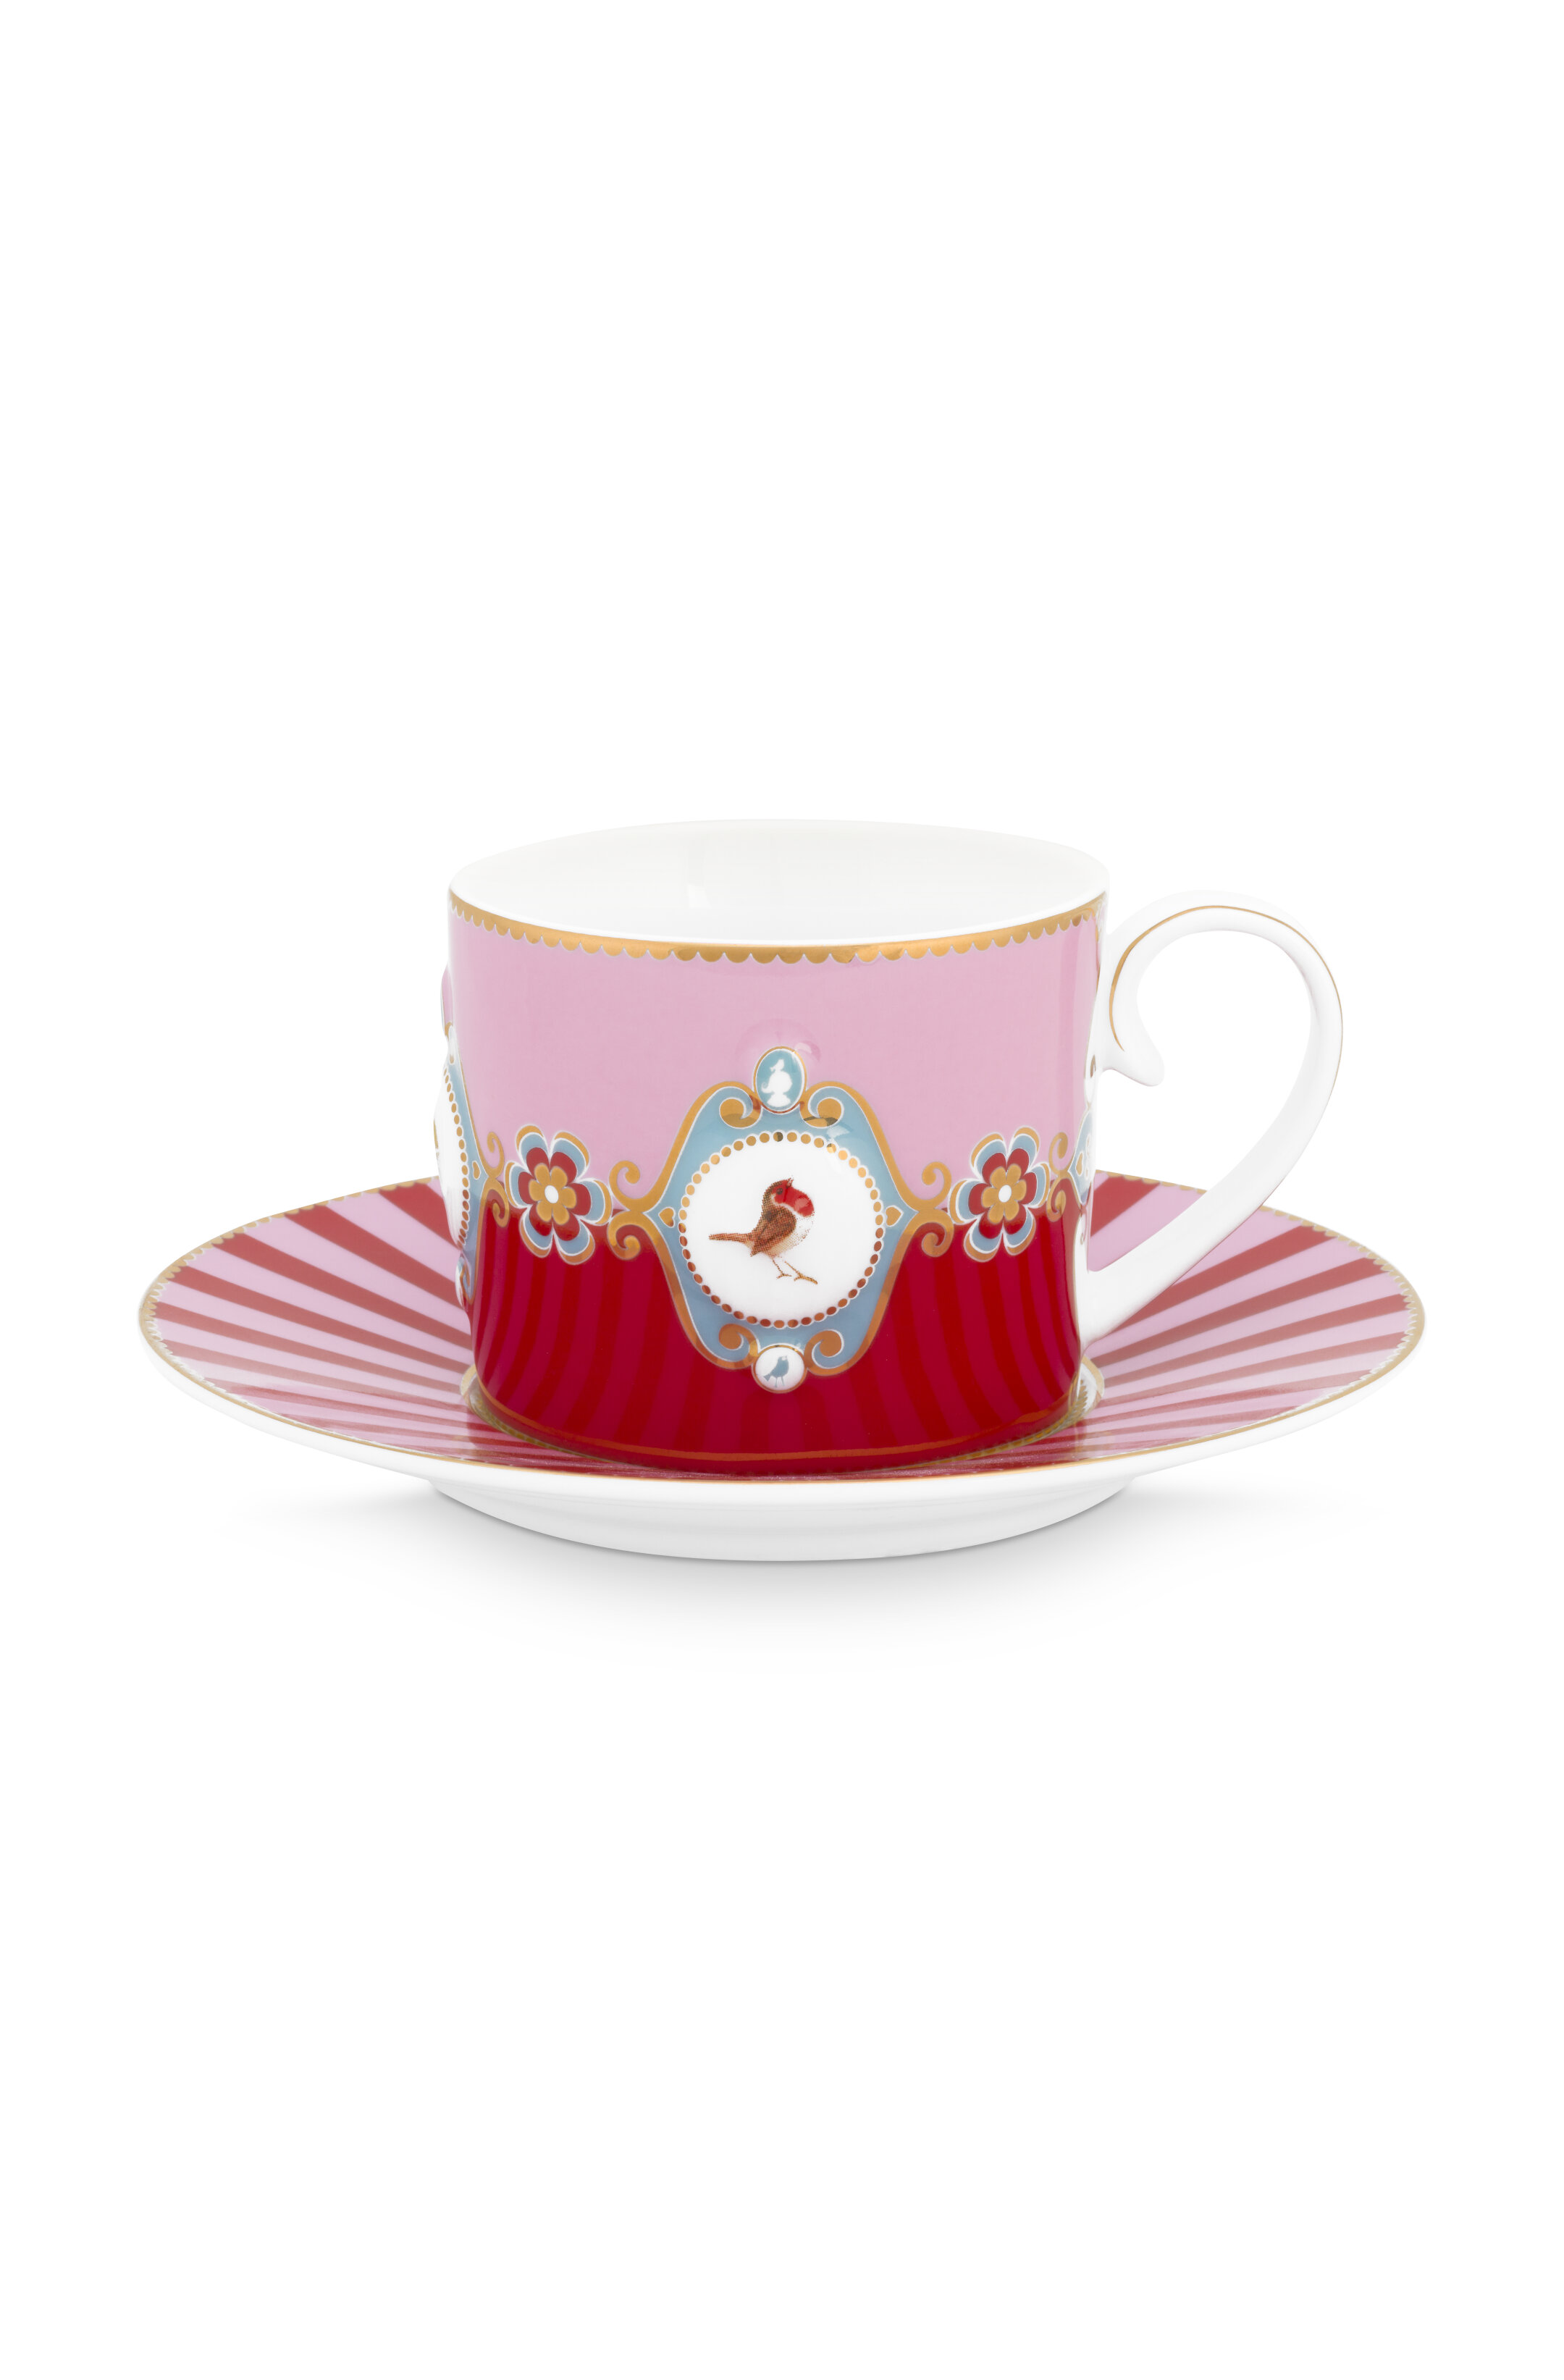 Pip Studio Love Birds Cup & Saucer Medallion Red-Pink